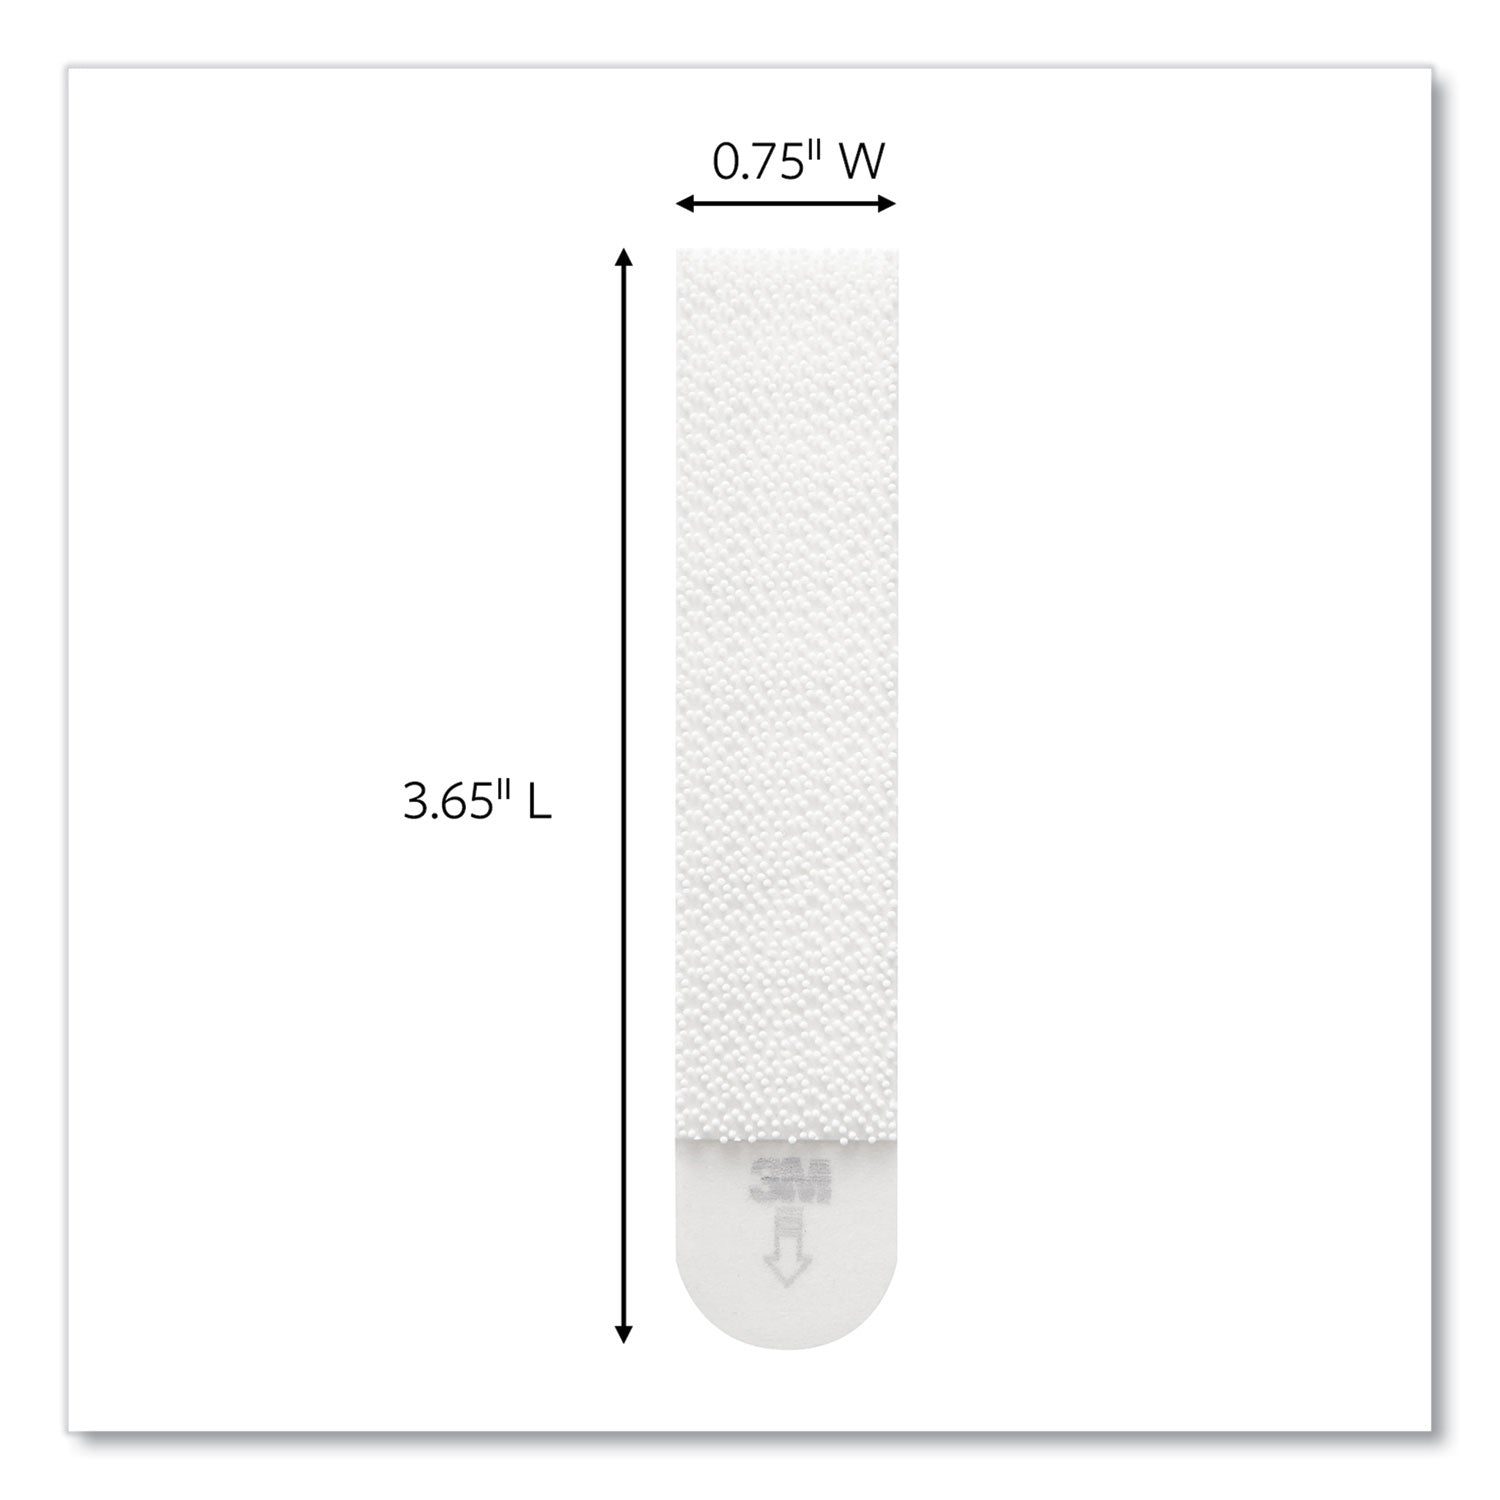 picture-hanging-strips-removable-holds-up-to-4-lbs-per-pair-large-063-x-363-white-20-pairs-pack_mmm1720620 - 3